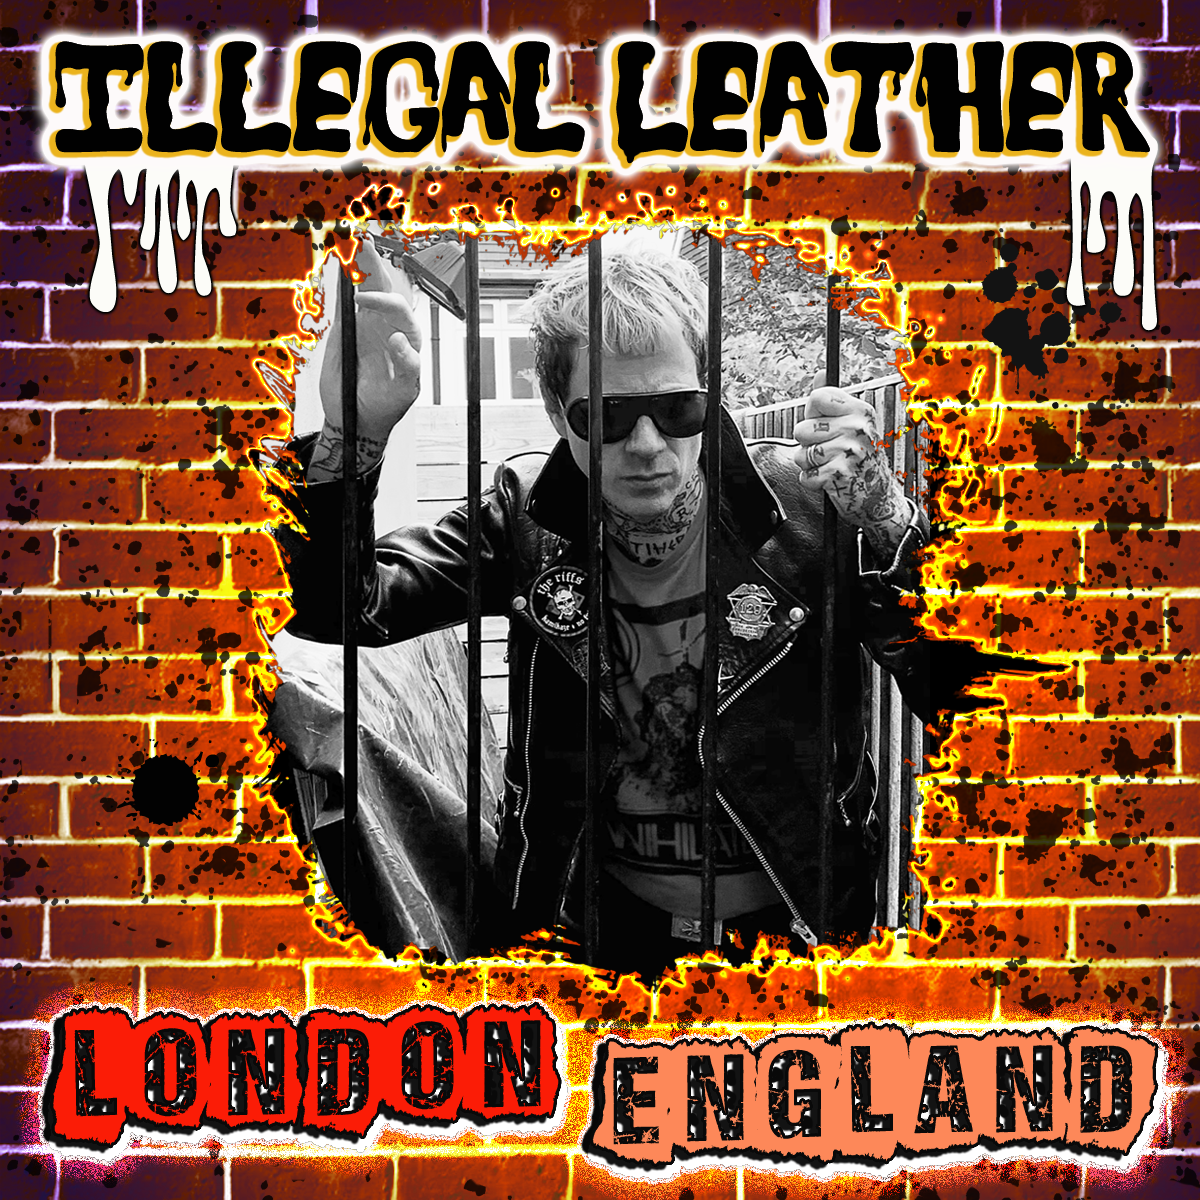 Illegal Leather- Raw Meat LP ~RARE COVER #2 OF 4-COVER QUADRILOGY LTD TO 35 HAND NUMBERED COPIES!